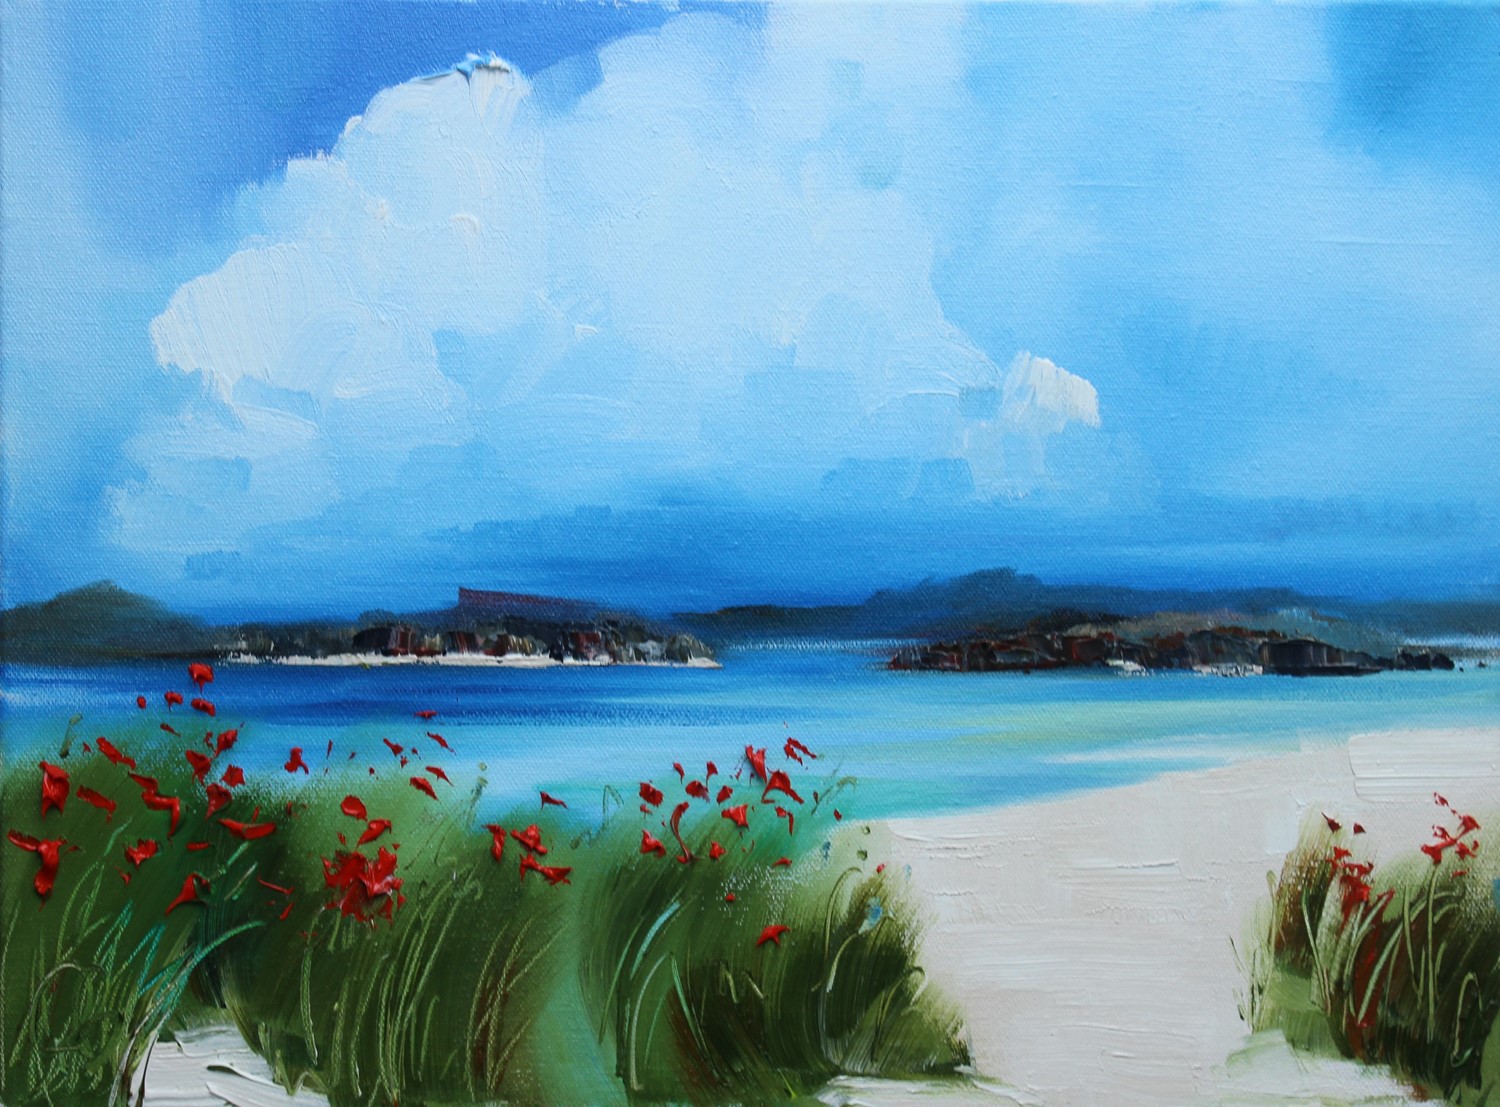 'On a bright summer day' by artist Rosanne Barr